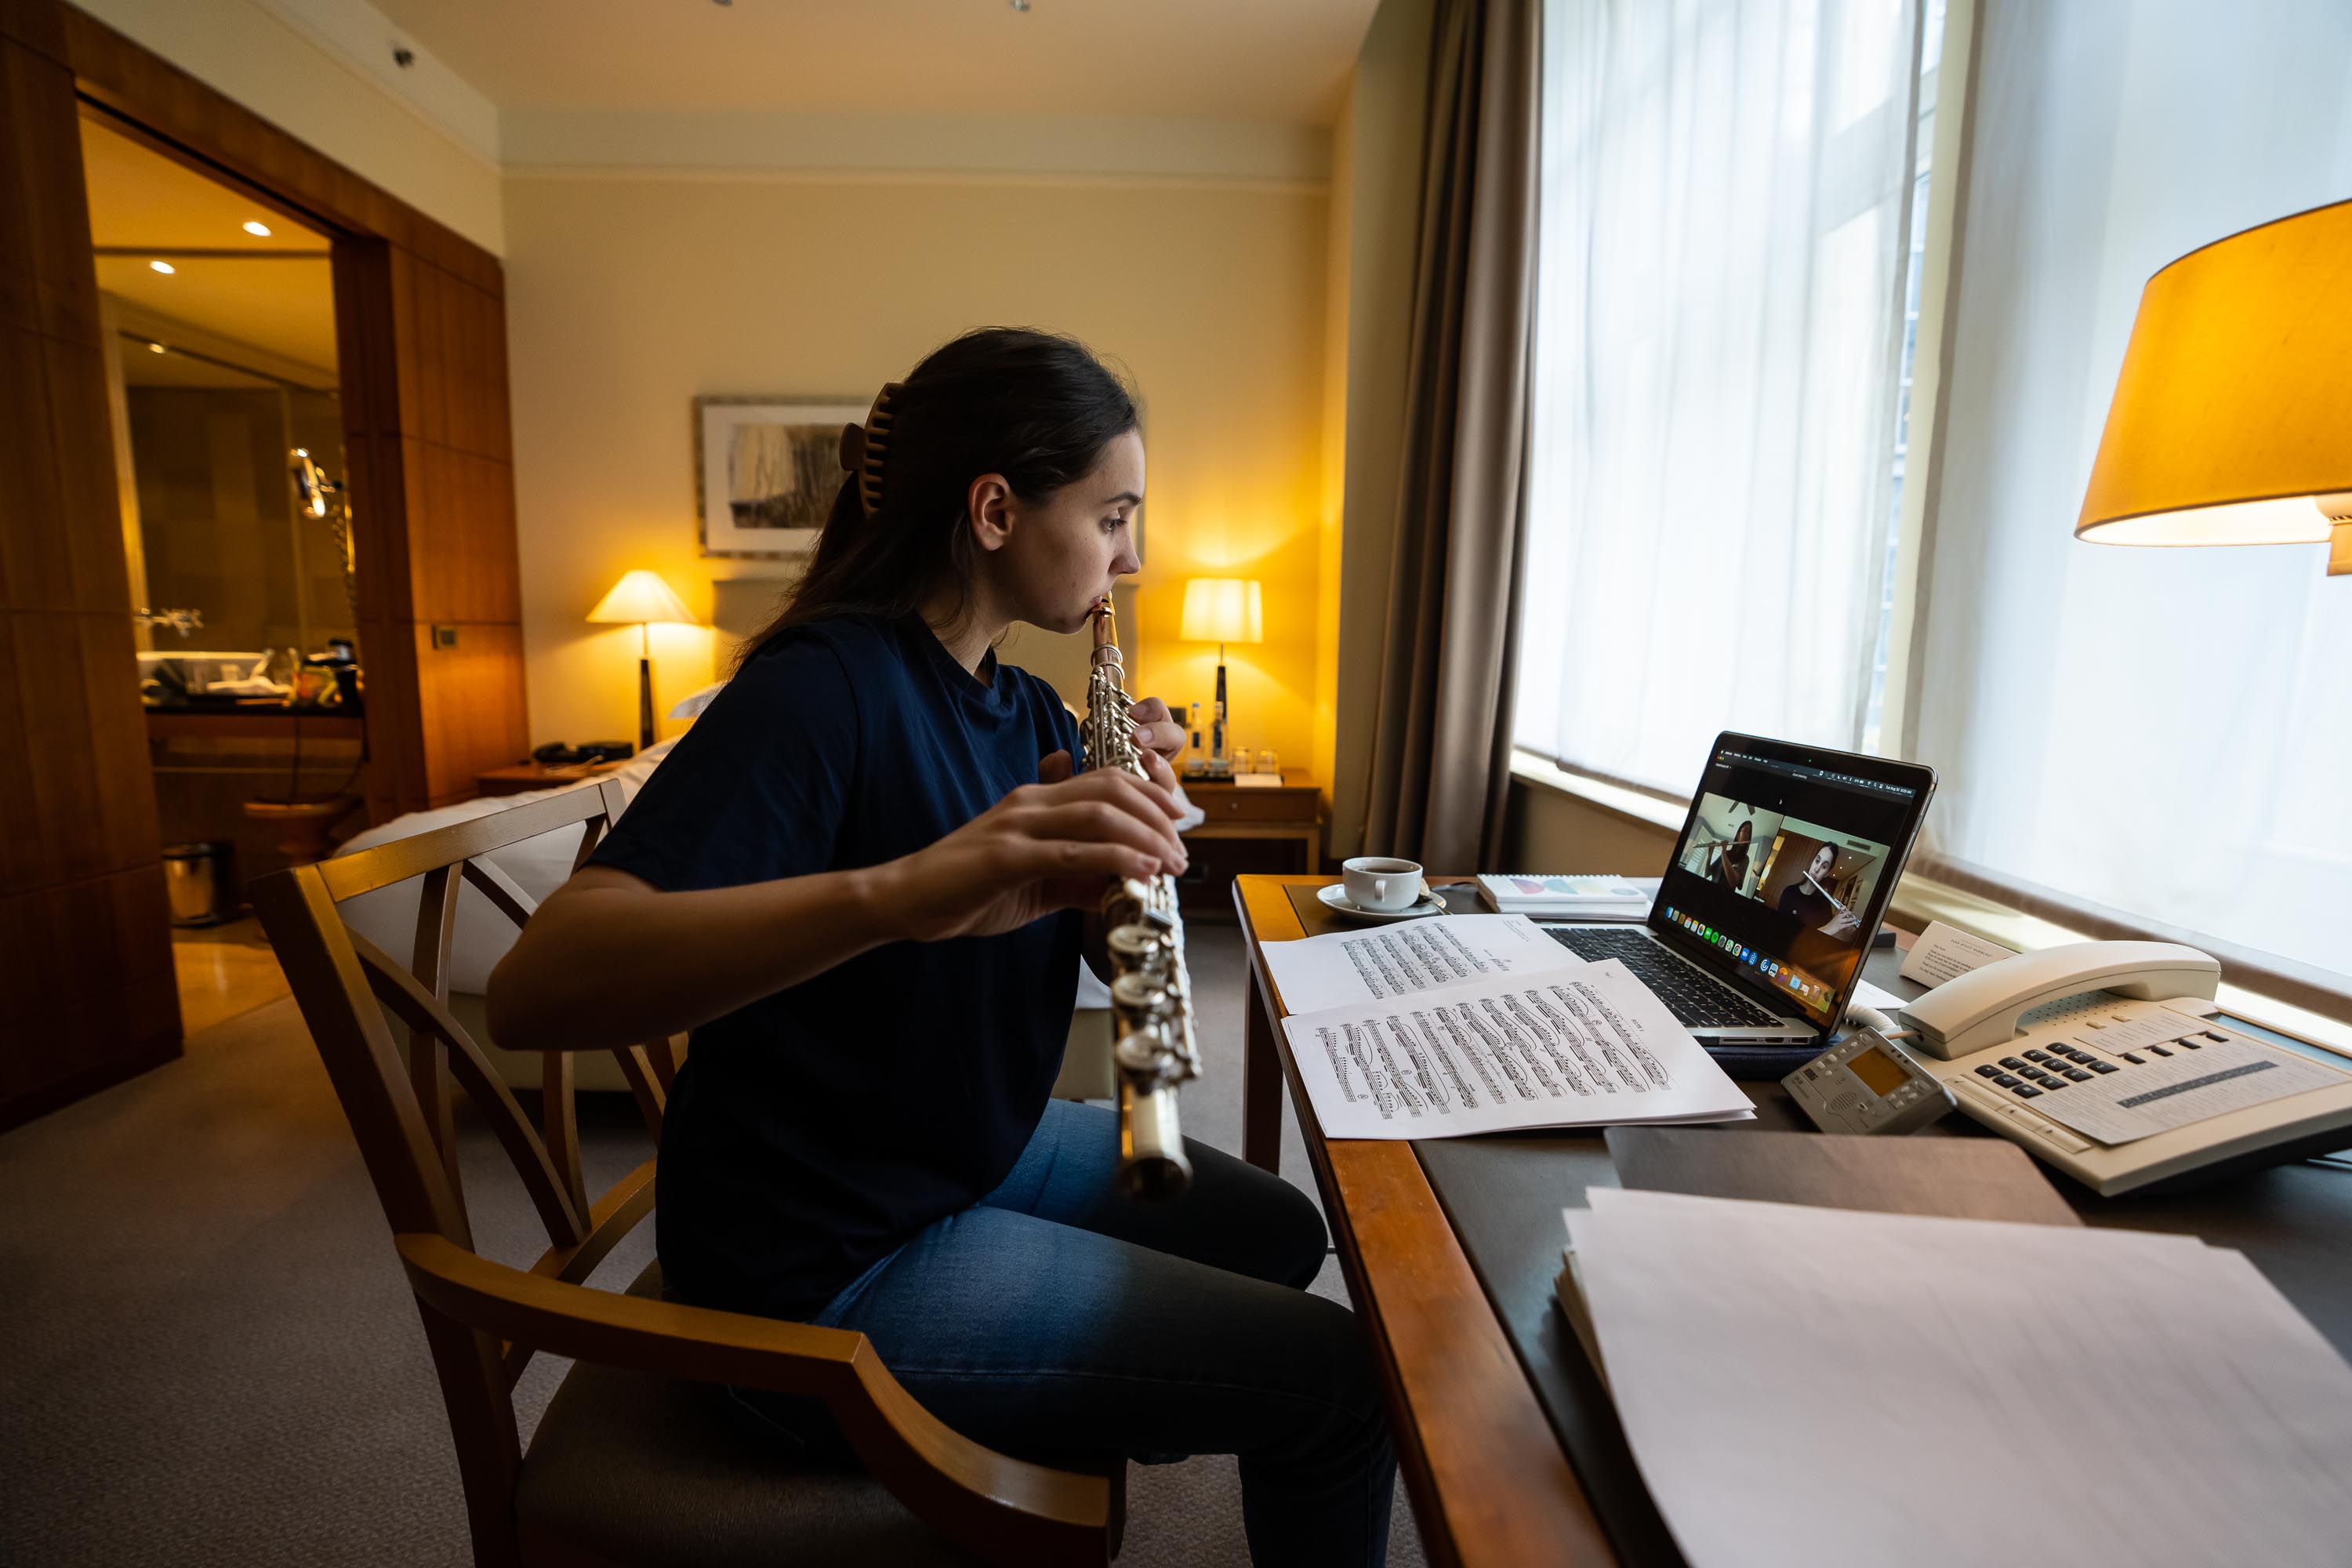 Flutist Olivia Staton gave a lesson to one of her students over Zoom from her hotel room